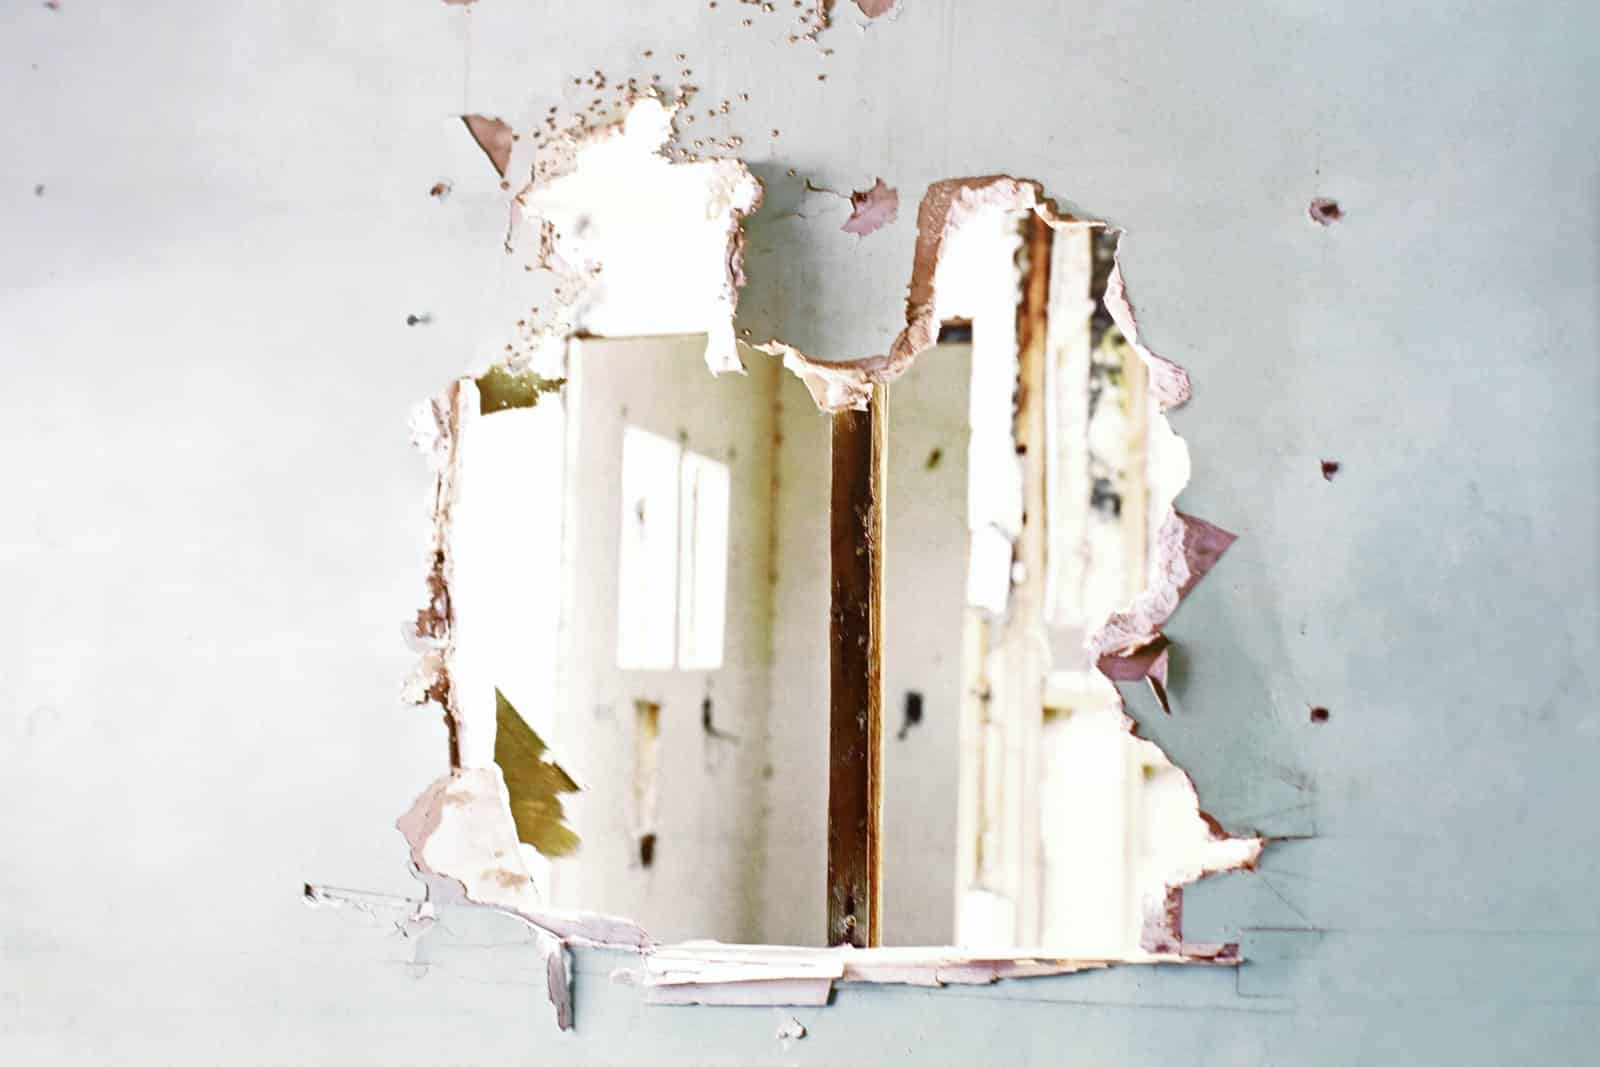 How To Patch A Hole in Drywall